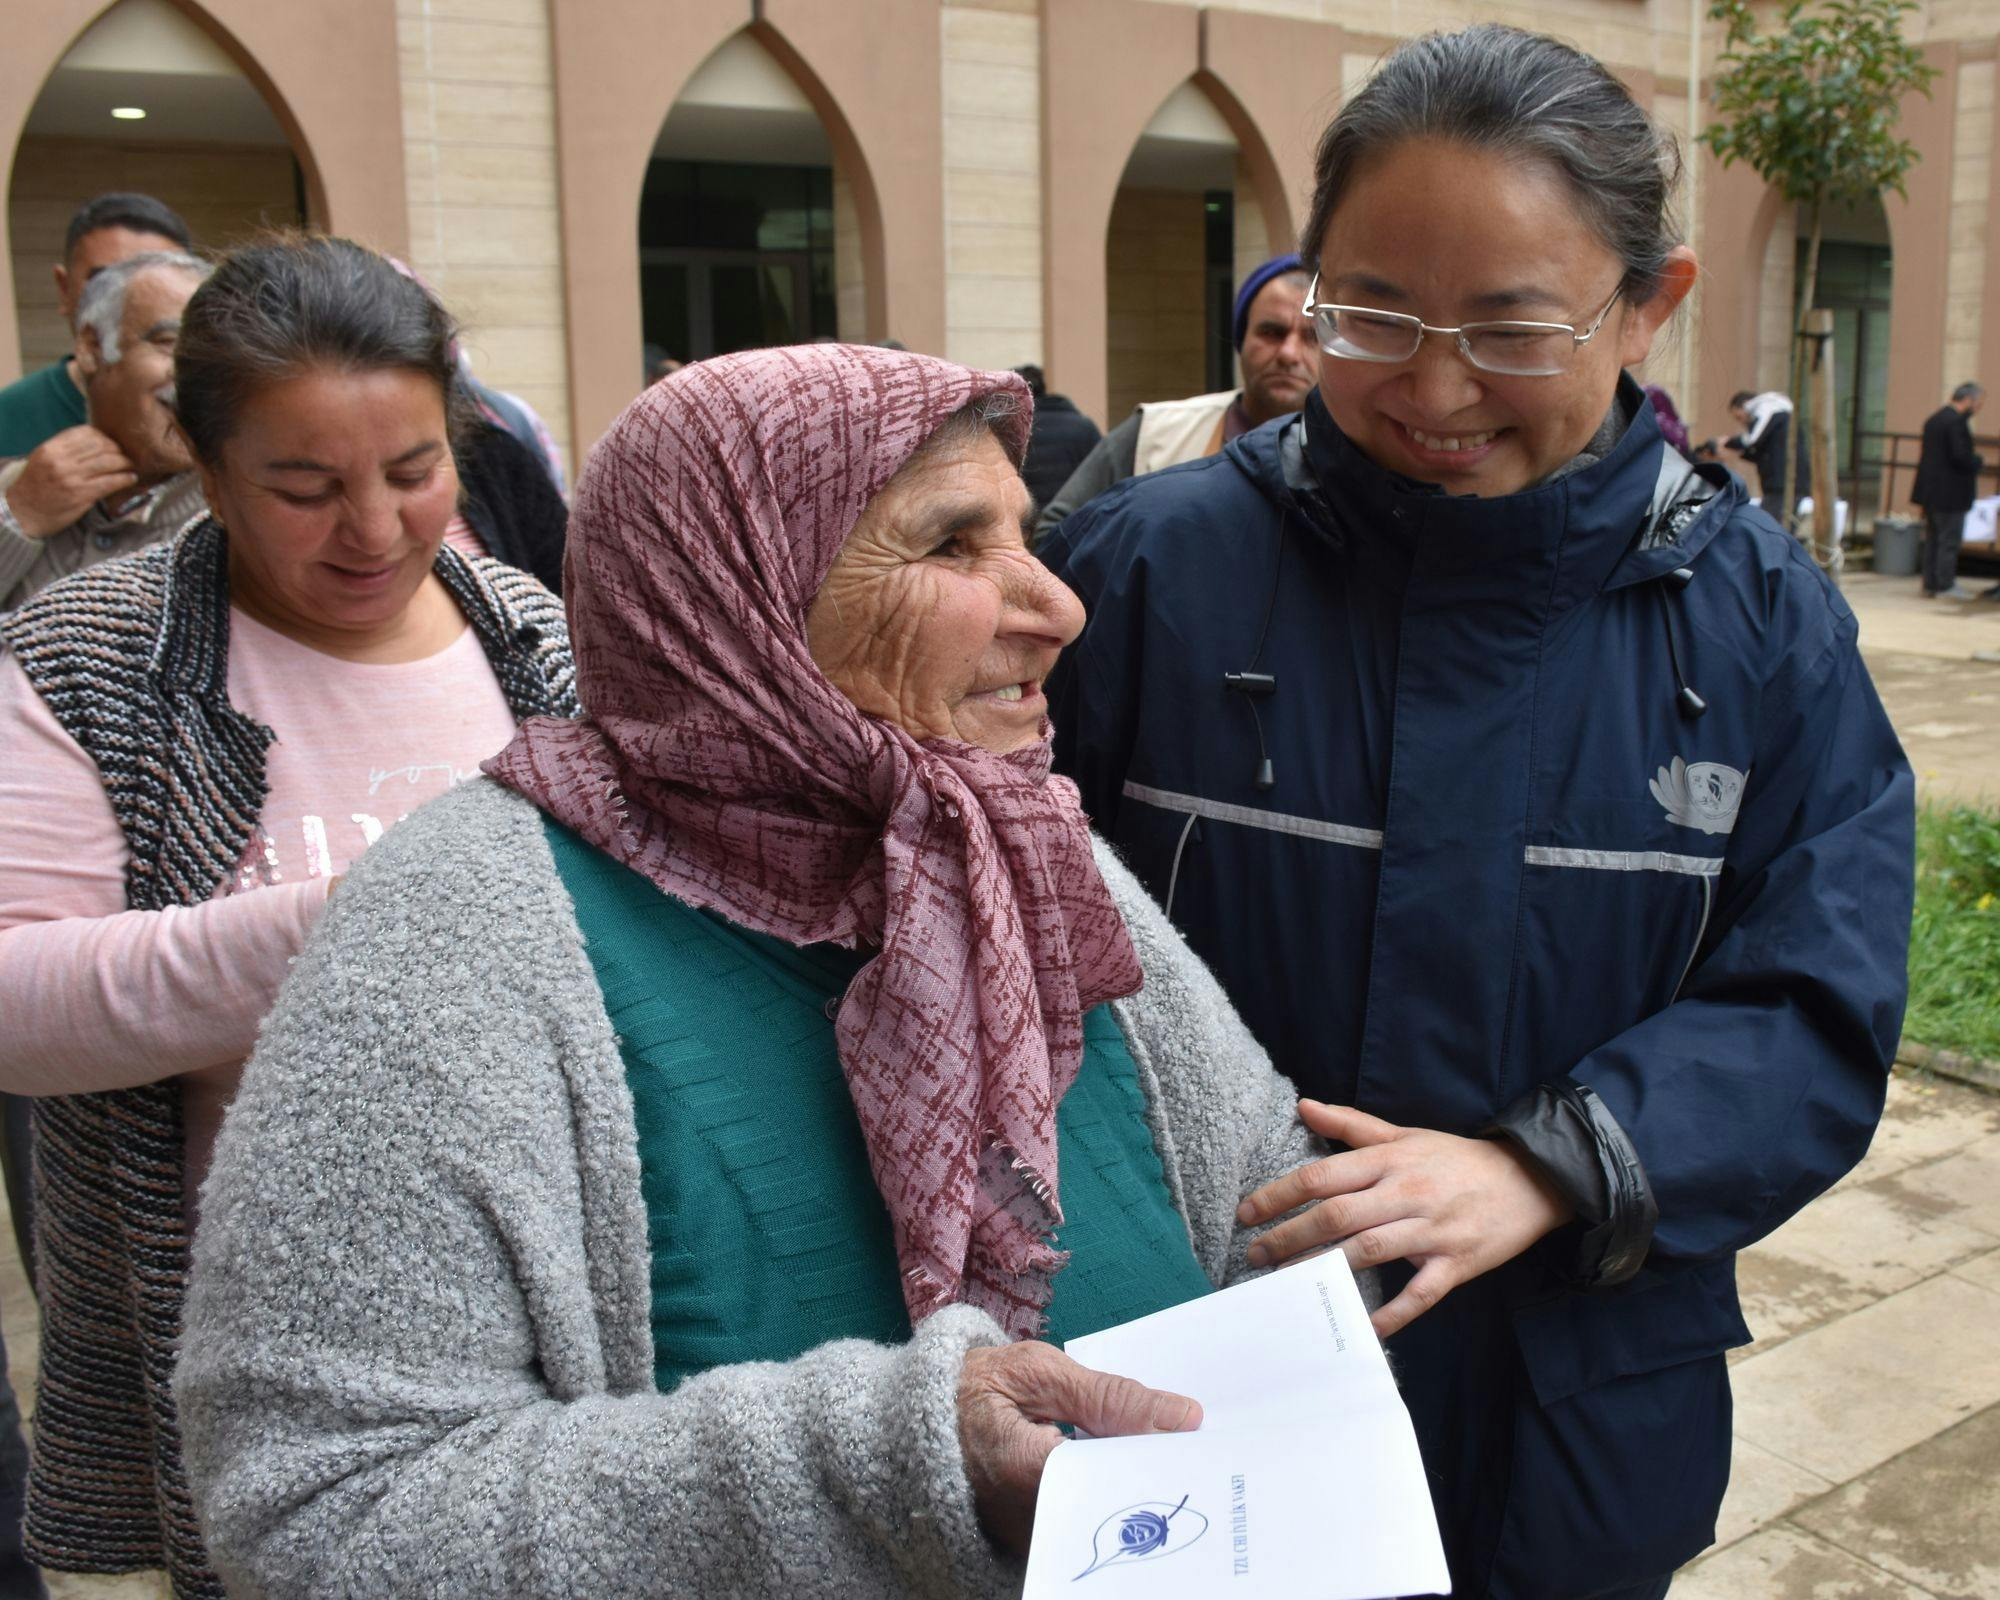 Buddhistdoor Global | Engaged Buddhism: Buddhist Tzu Chi Foundation Brings Compassion and Relief to 36,000 Families in Türkiye